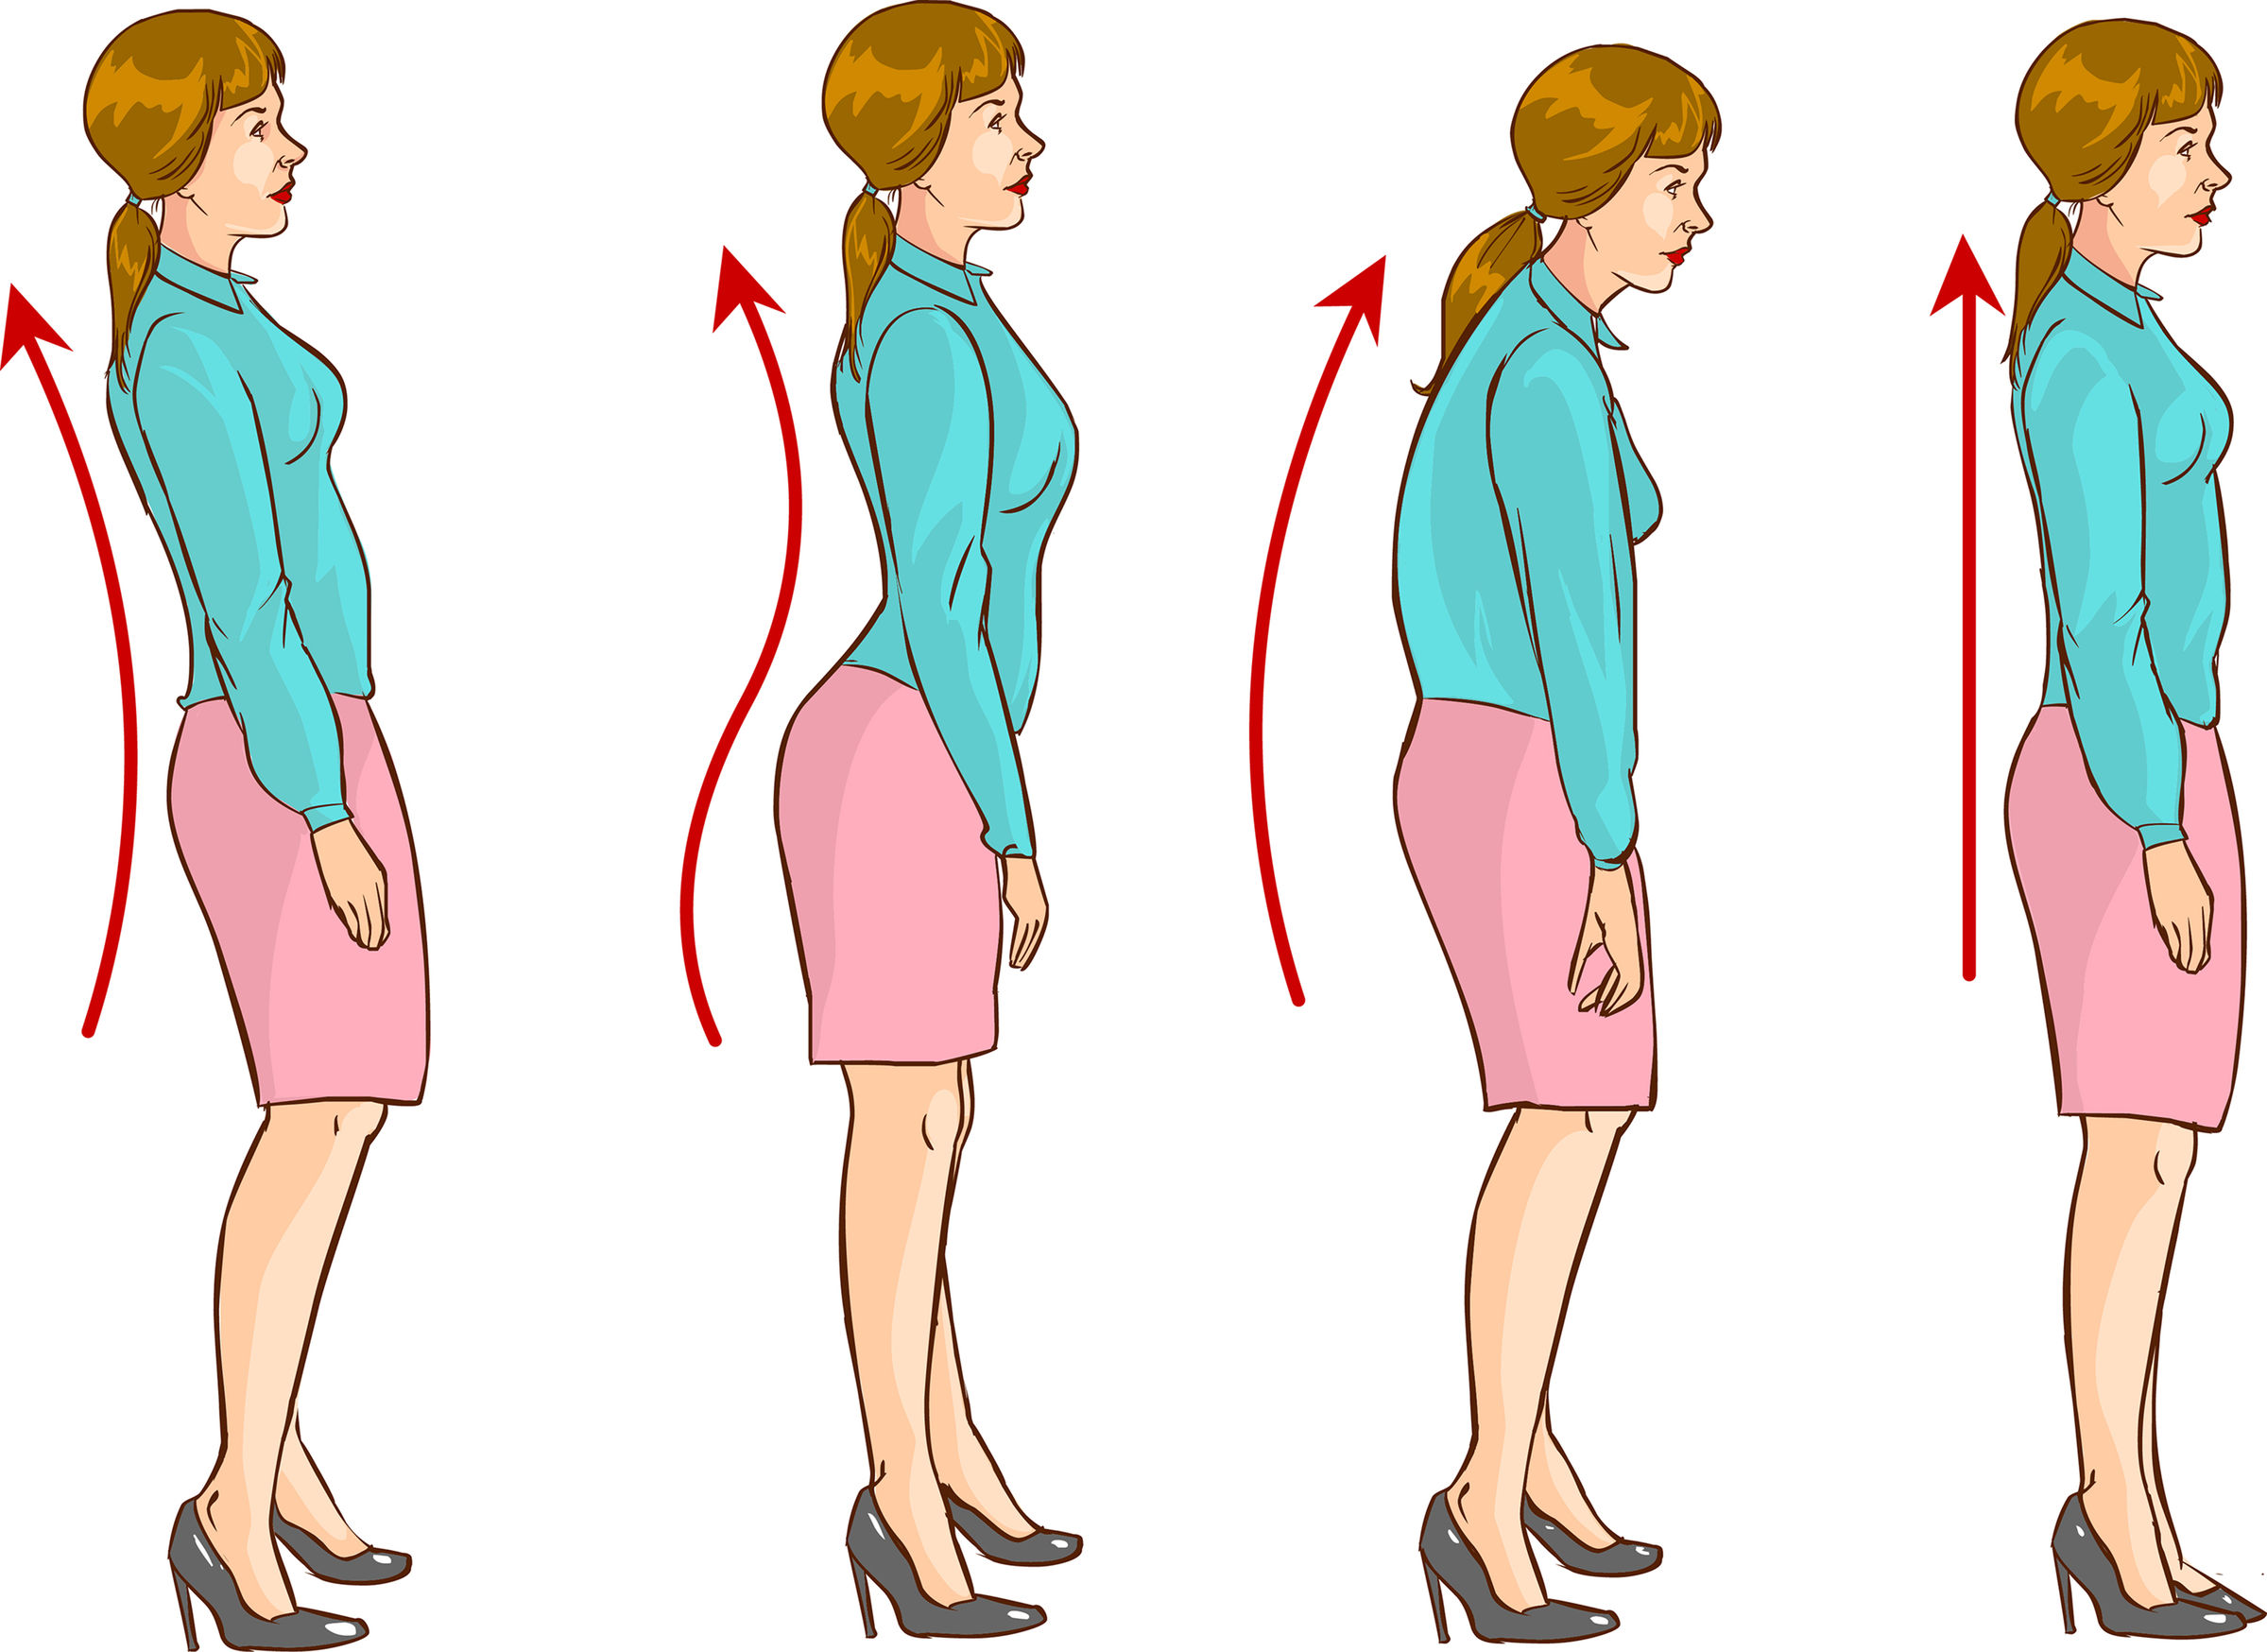 Key Benefits Of Good Posture: Know How Position Affects Health